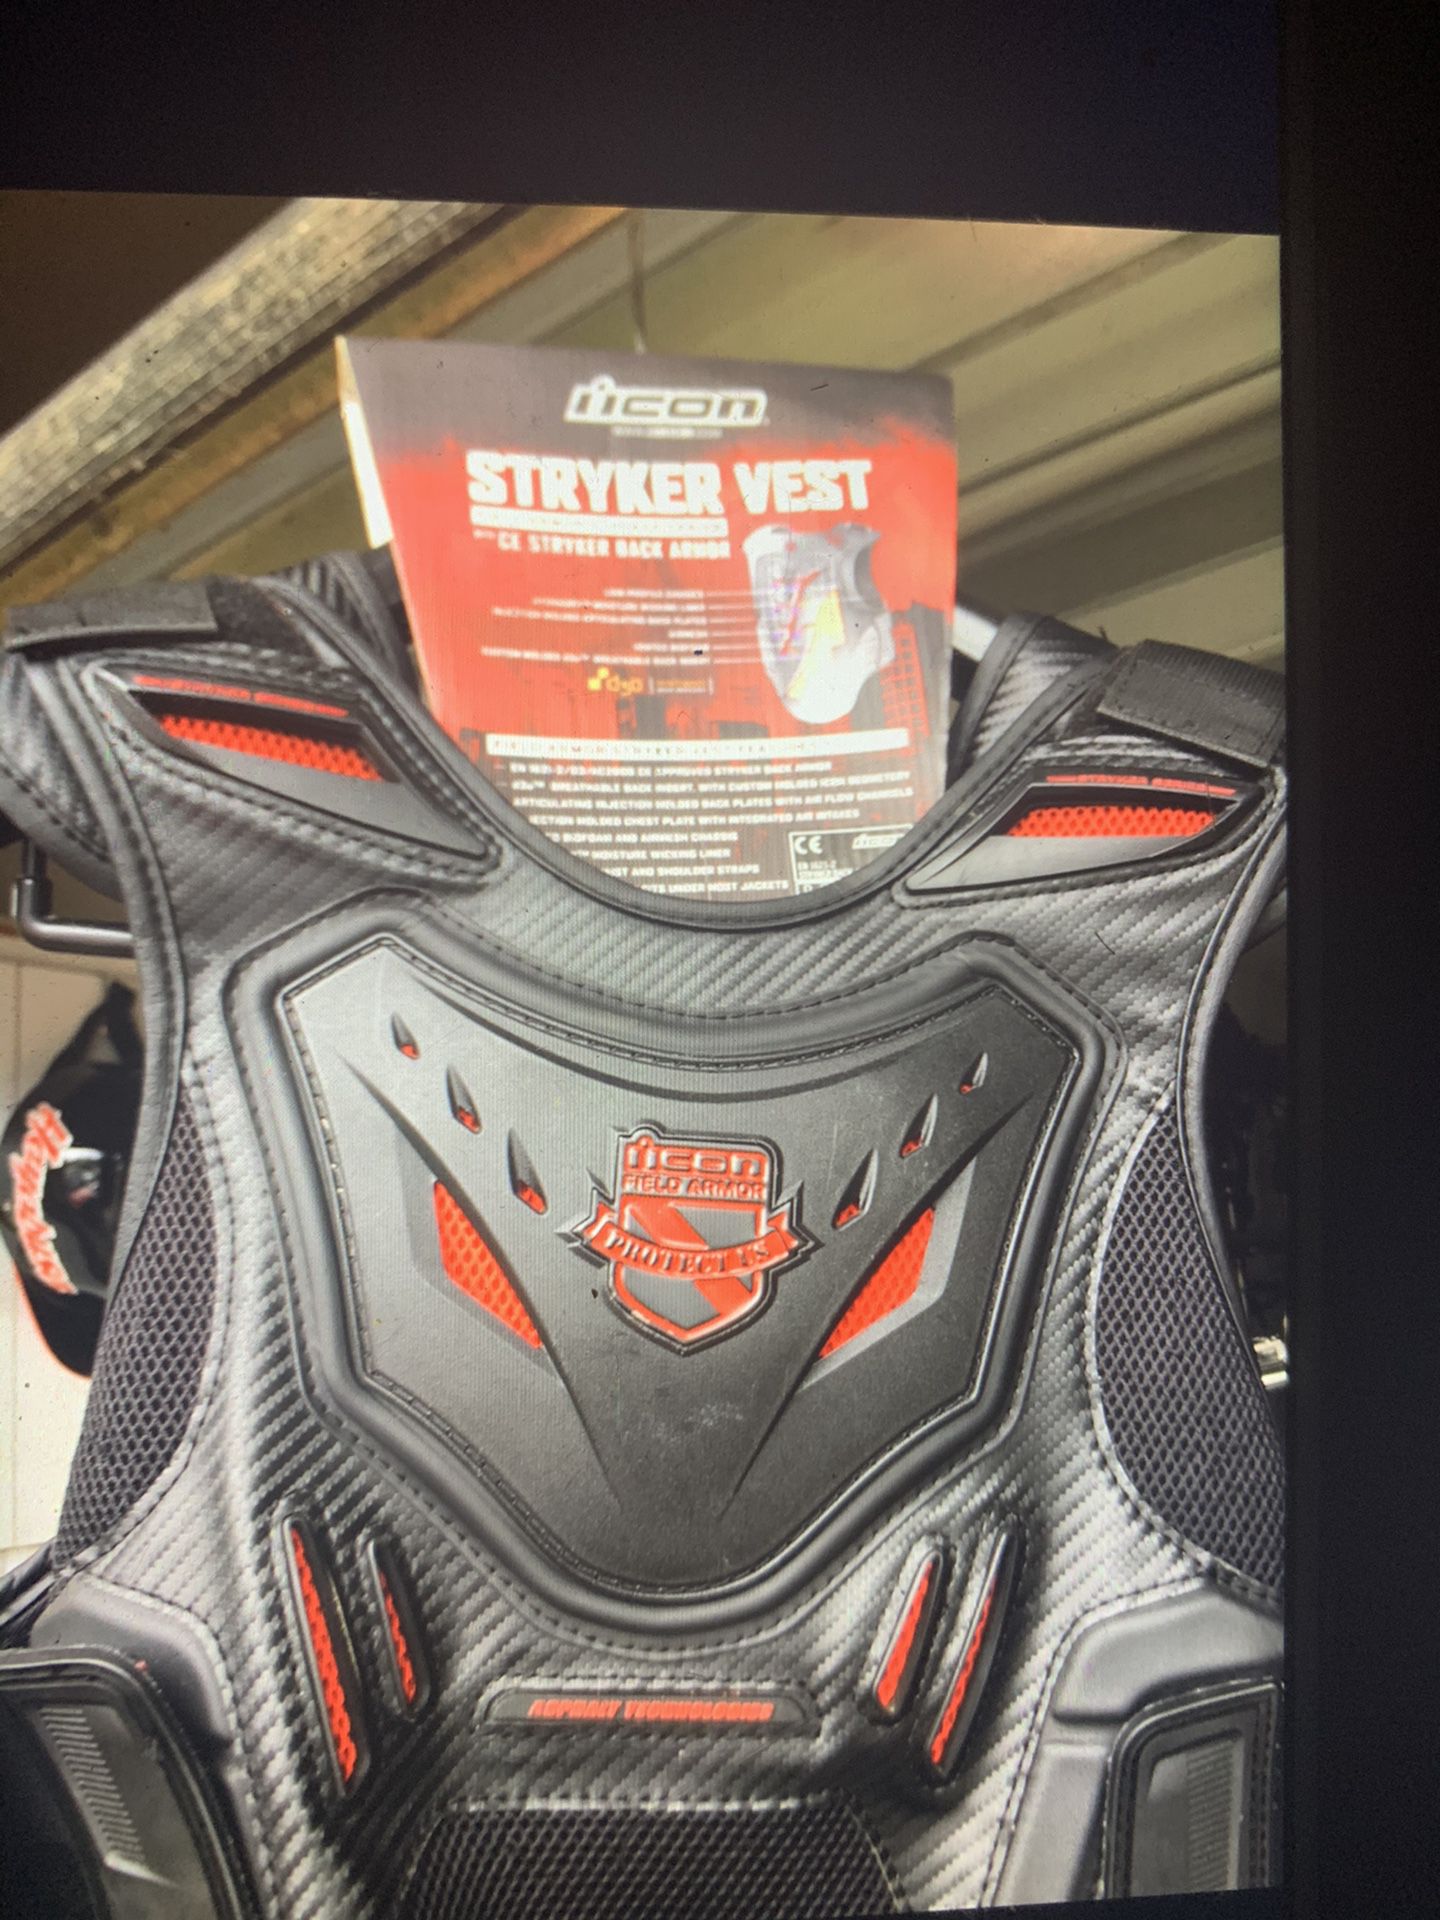 Brand new armor vest large extra large